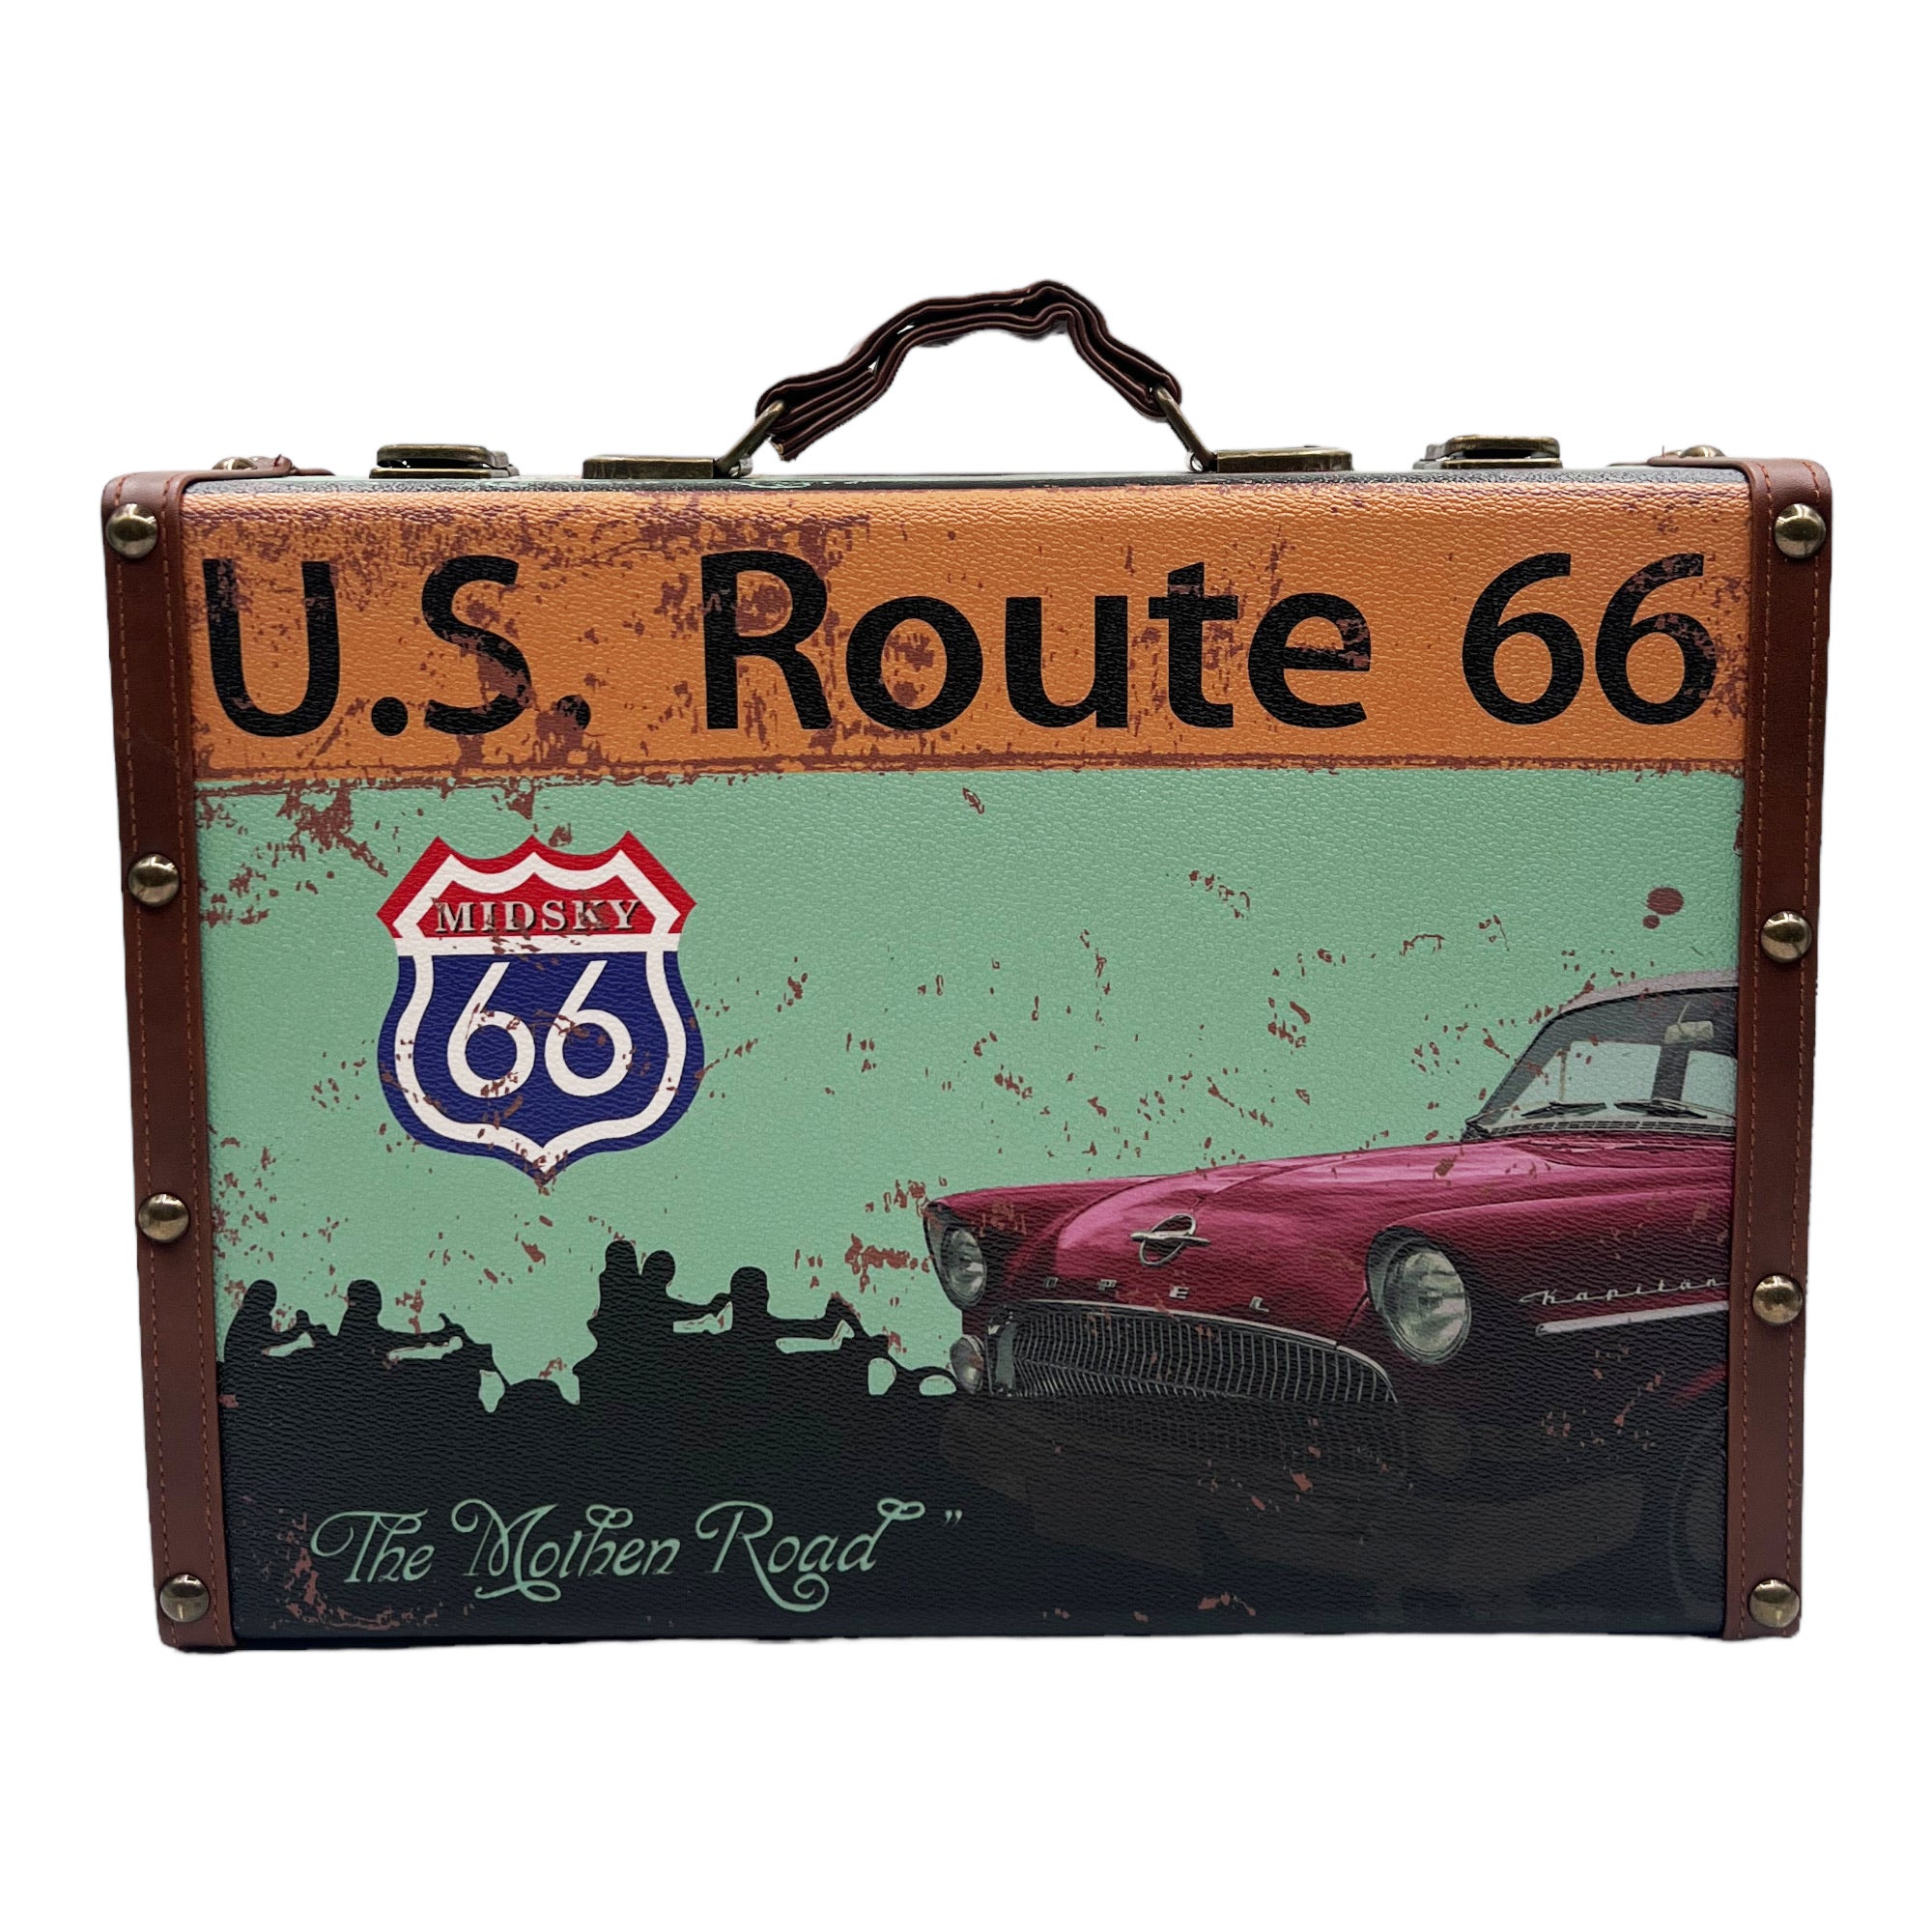 Eson - Barber Tools Carry Case Authentic Model (U.S. Route66)